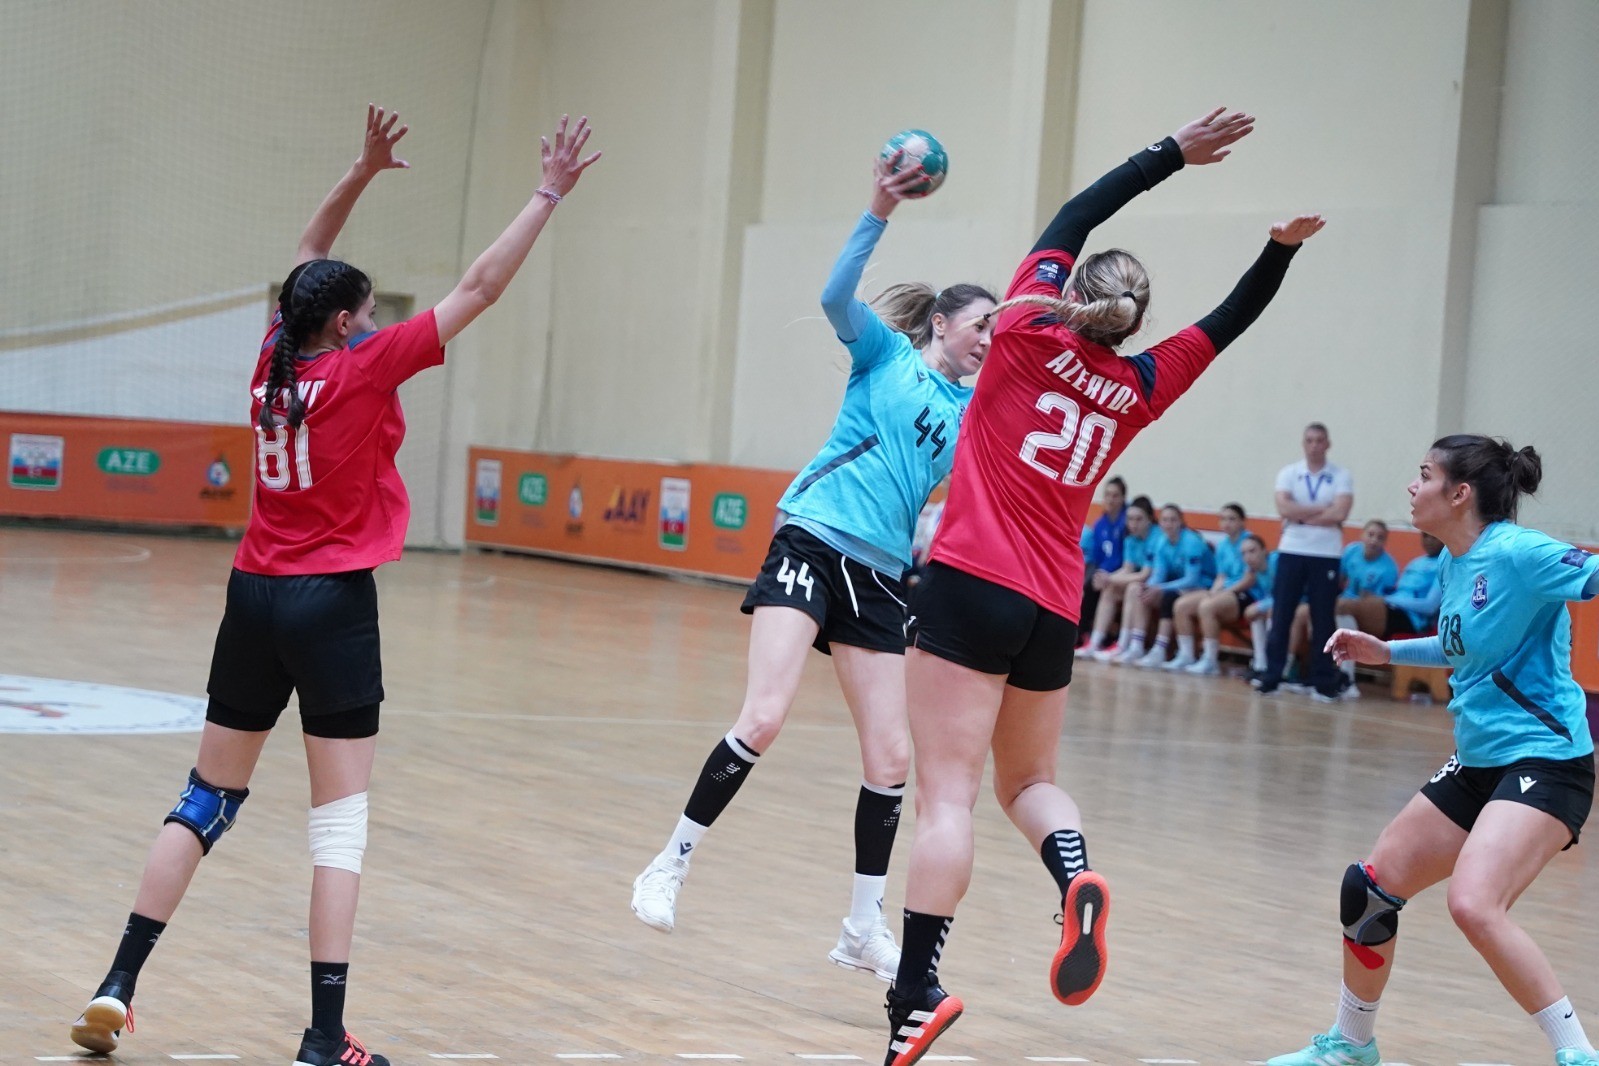 An interesting result in the Azerbaijan championship: "Ganclerbirliyi" won only 5 points